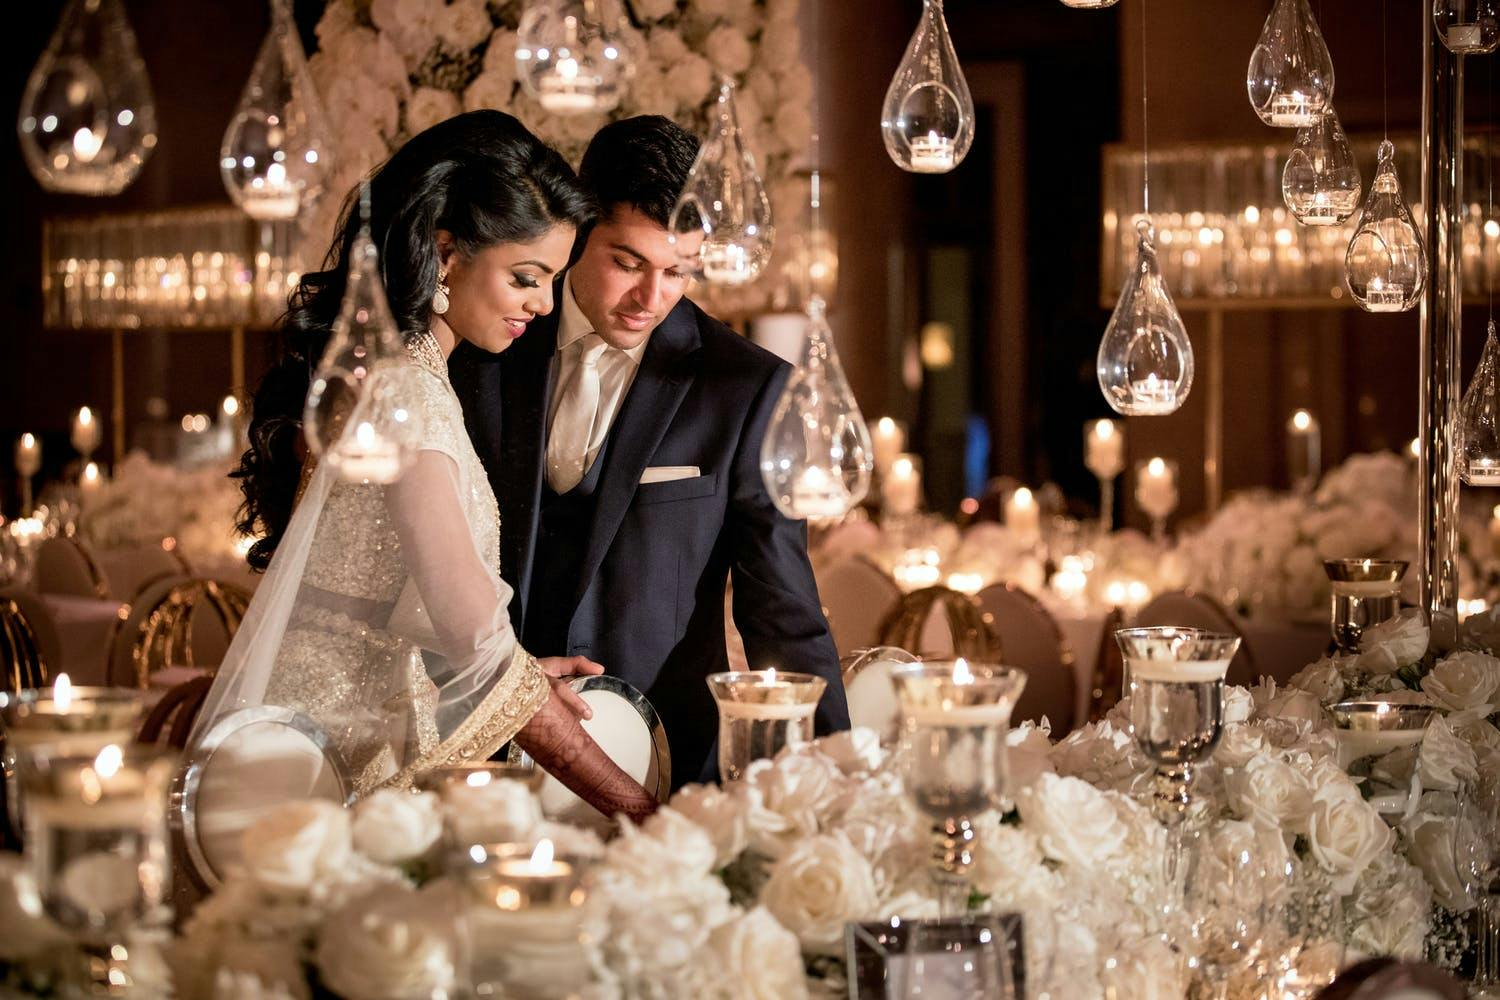 Bride and Groom Share a Moment at White Wedding Tablescape and Suspended Globed Candlelight | PartySlate